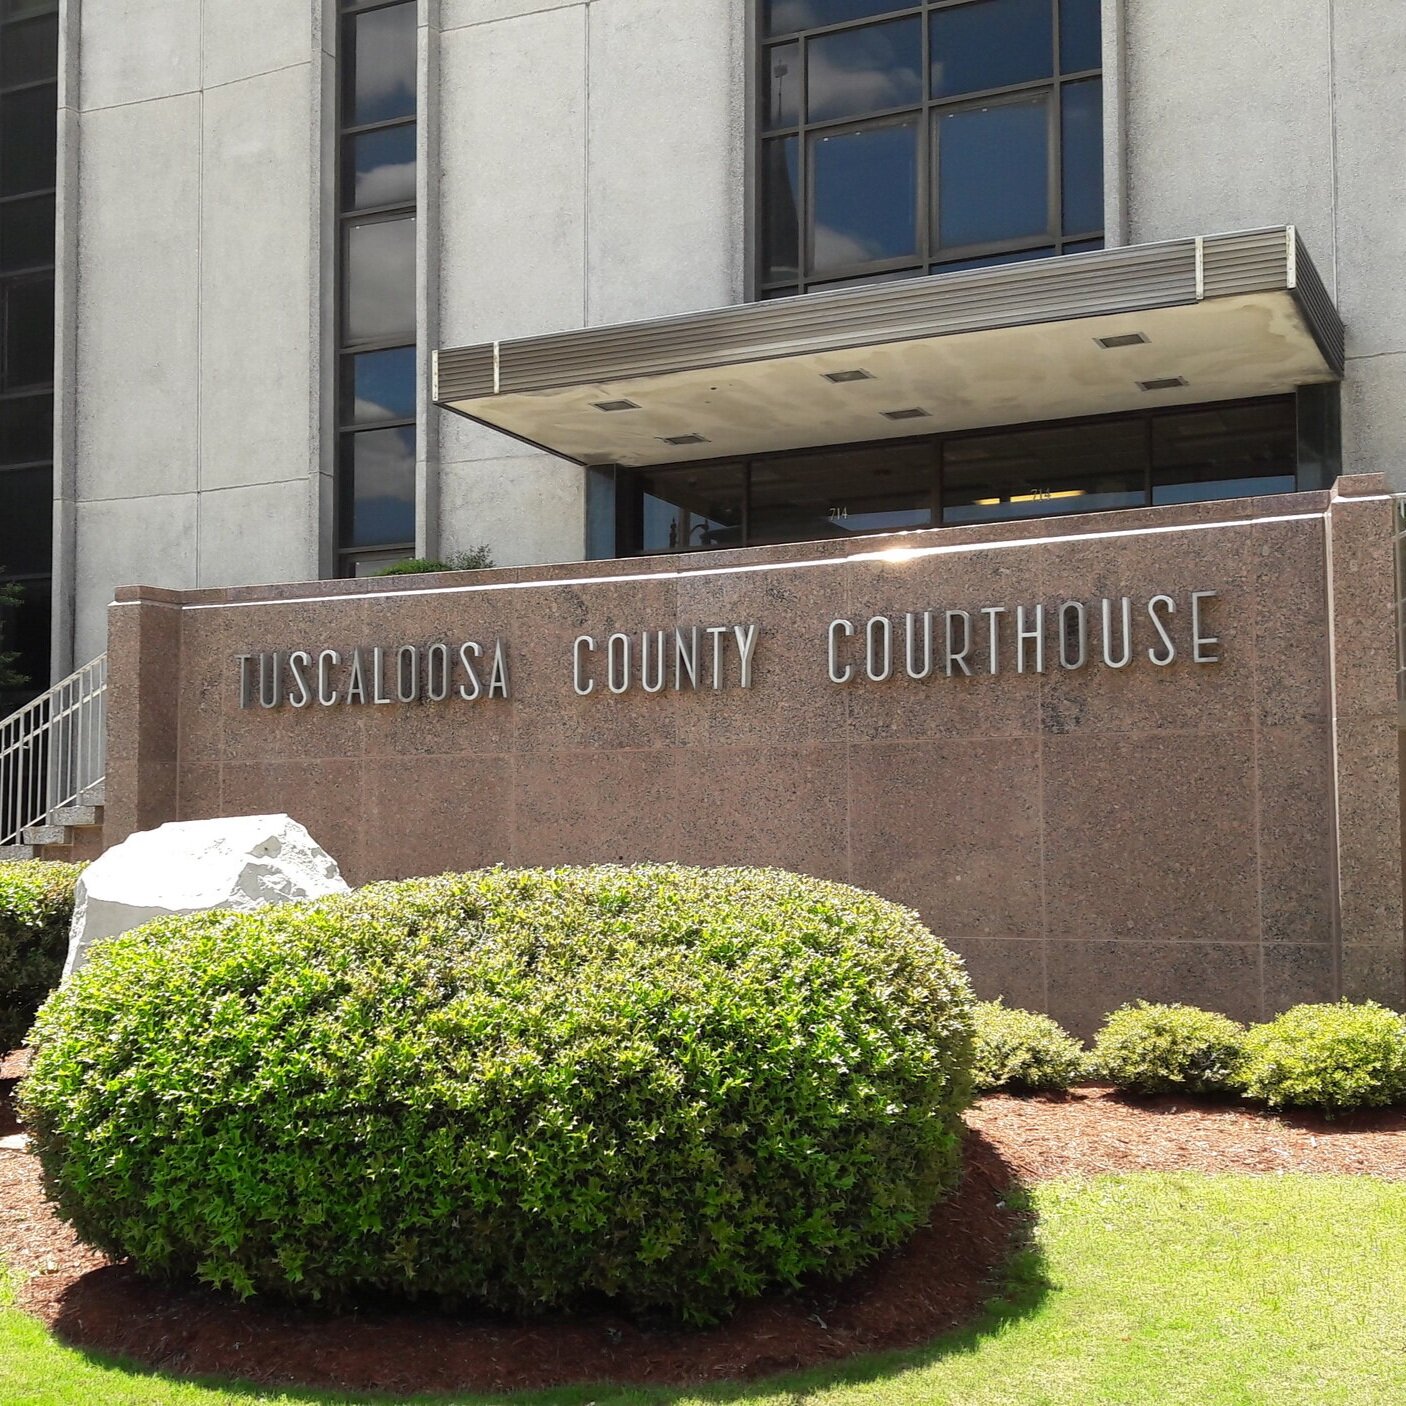 Tuscaloosa County Courthouse - the scene of Bloody Tuesday